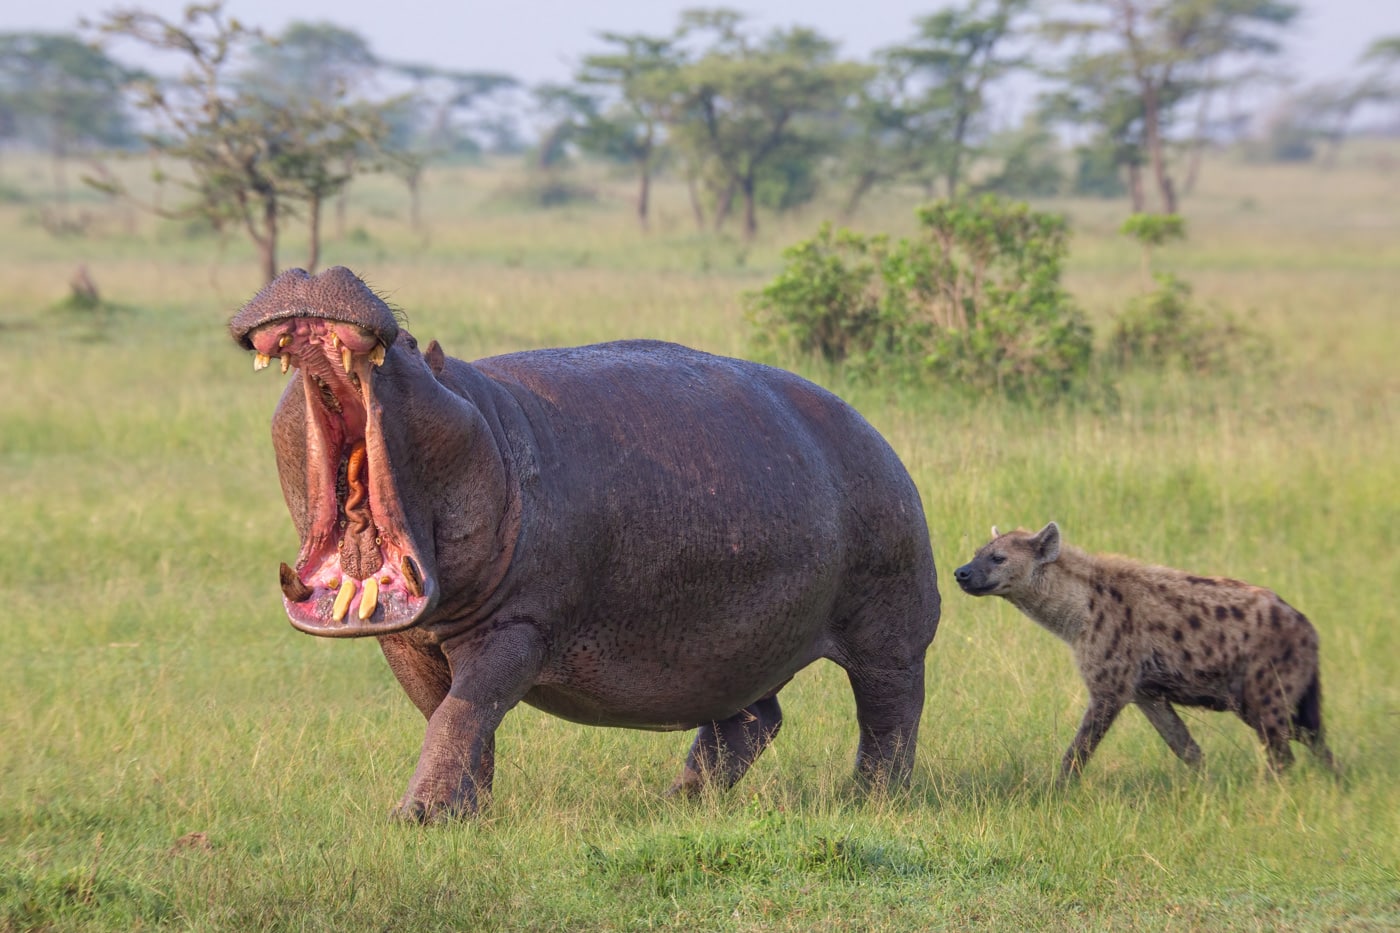 Hippo Walking On The Grass With Open Mouth While Spotted Hyena S